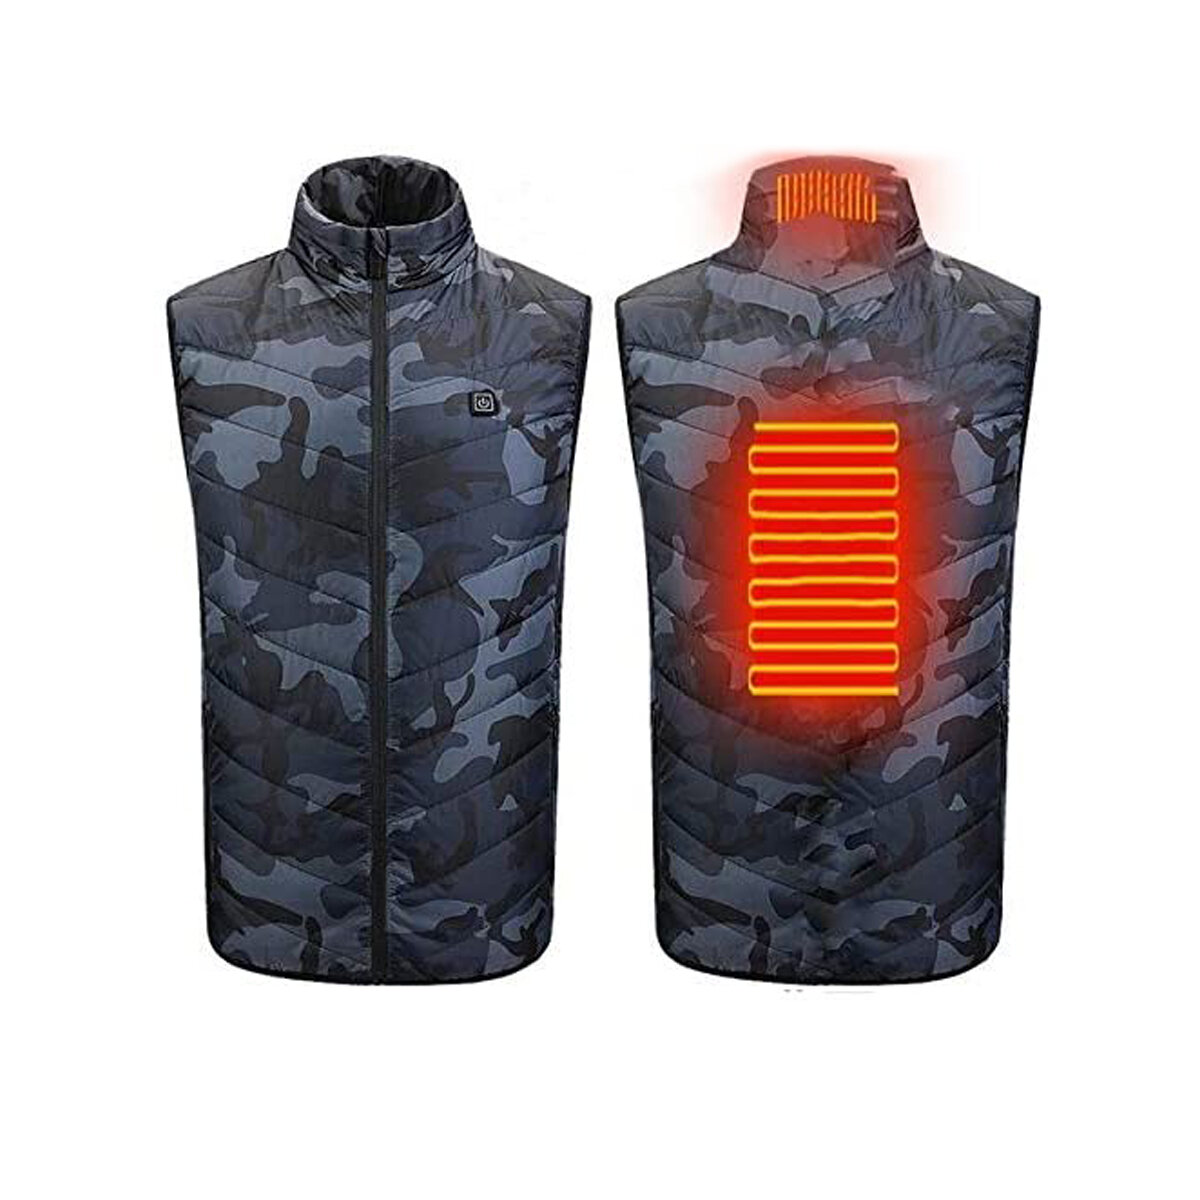 Camouflage Electric Heated Vest 2 Heating Zone 3 Gear Adjustable Heating Jacket Vest USB Charging Washable Winter Warm C